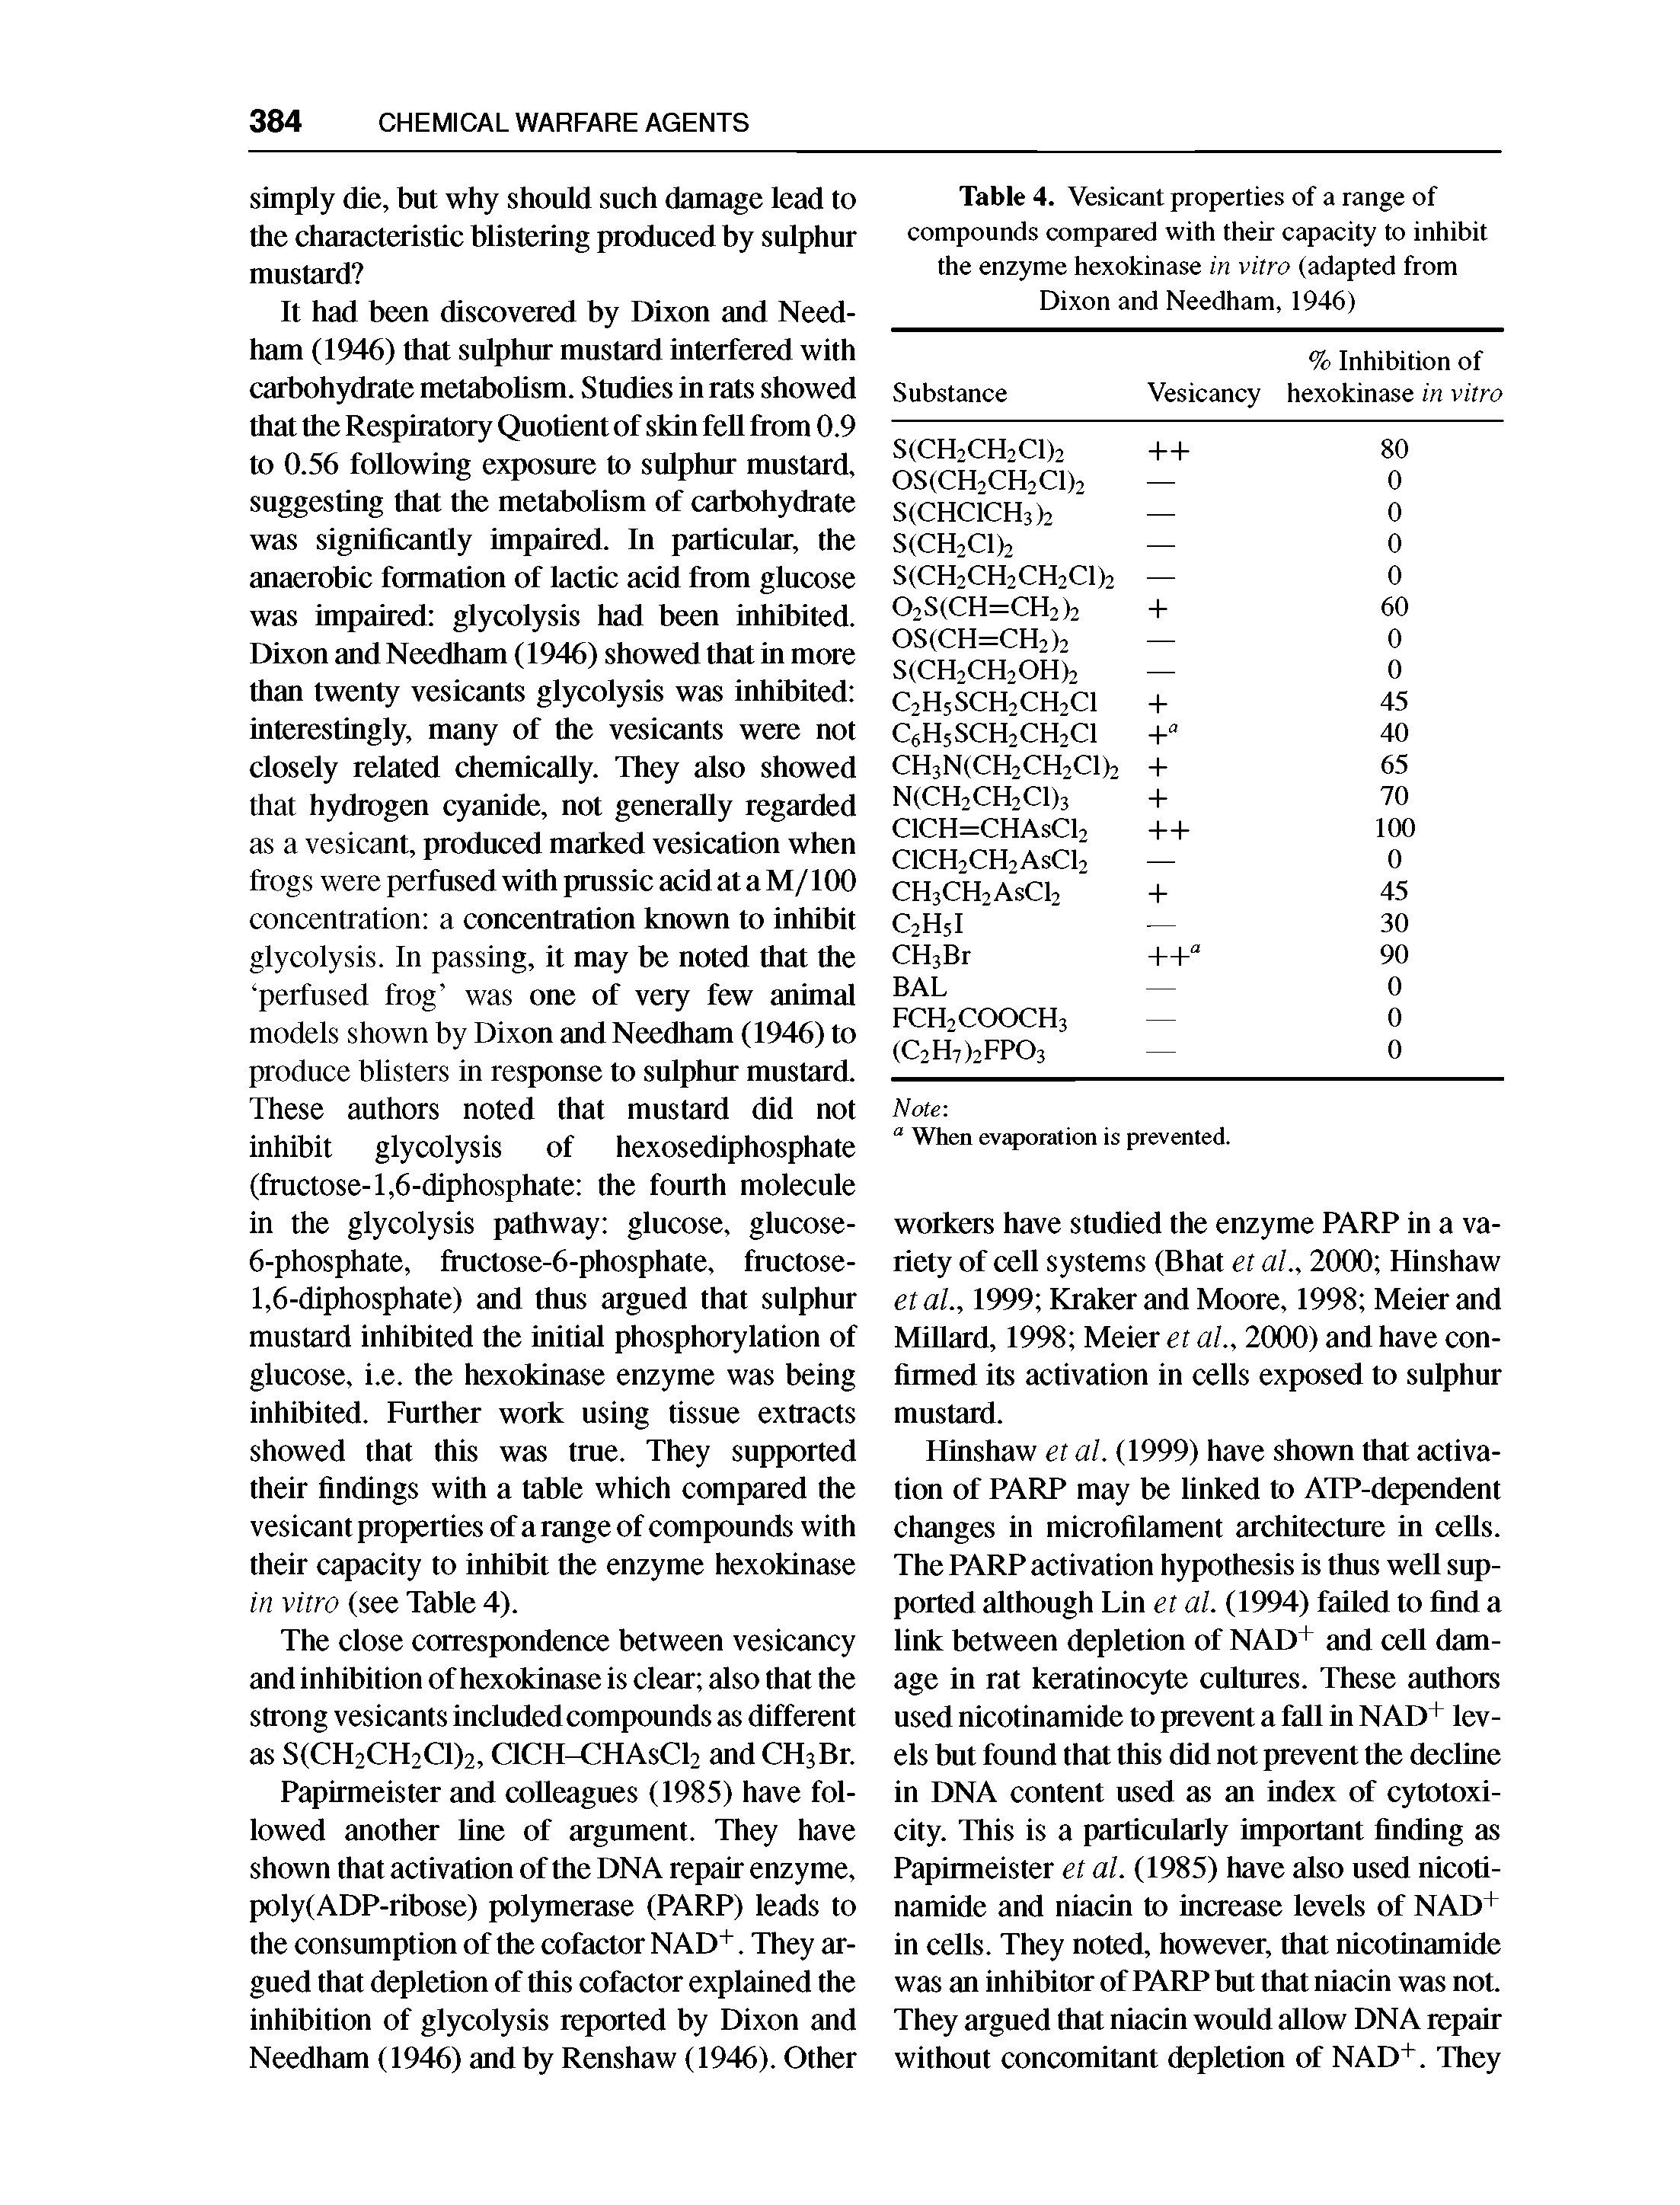 Table 4. Vesicant properties of a range of compounds compared with their capacity to inhibit the enzyme hexokinase in vitro (adapted from Dixon and Needham, 1946)...